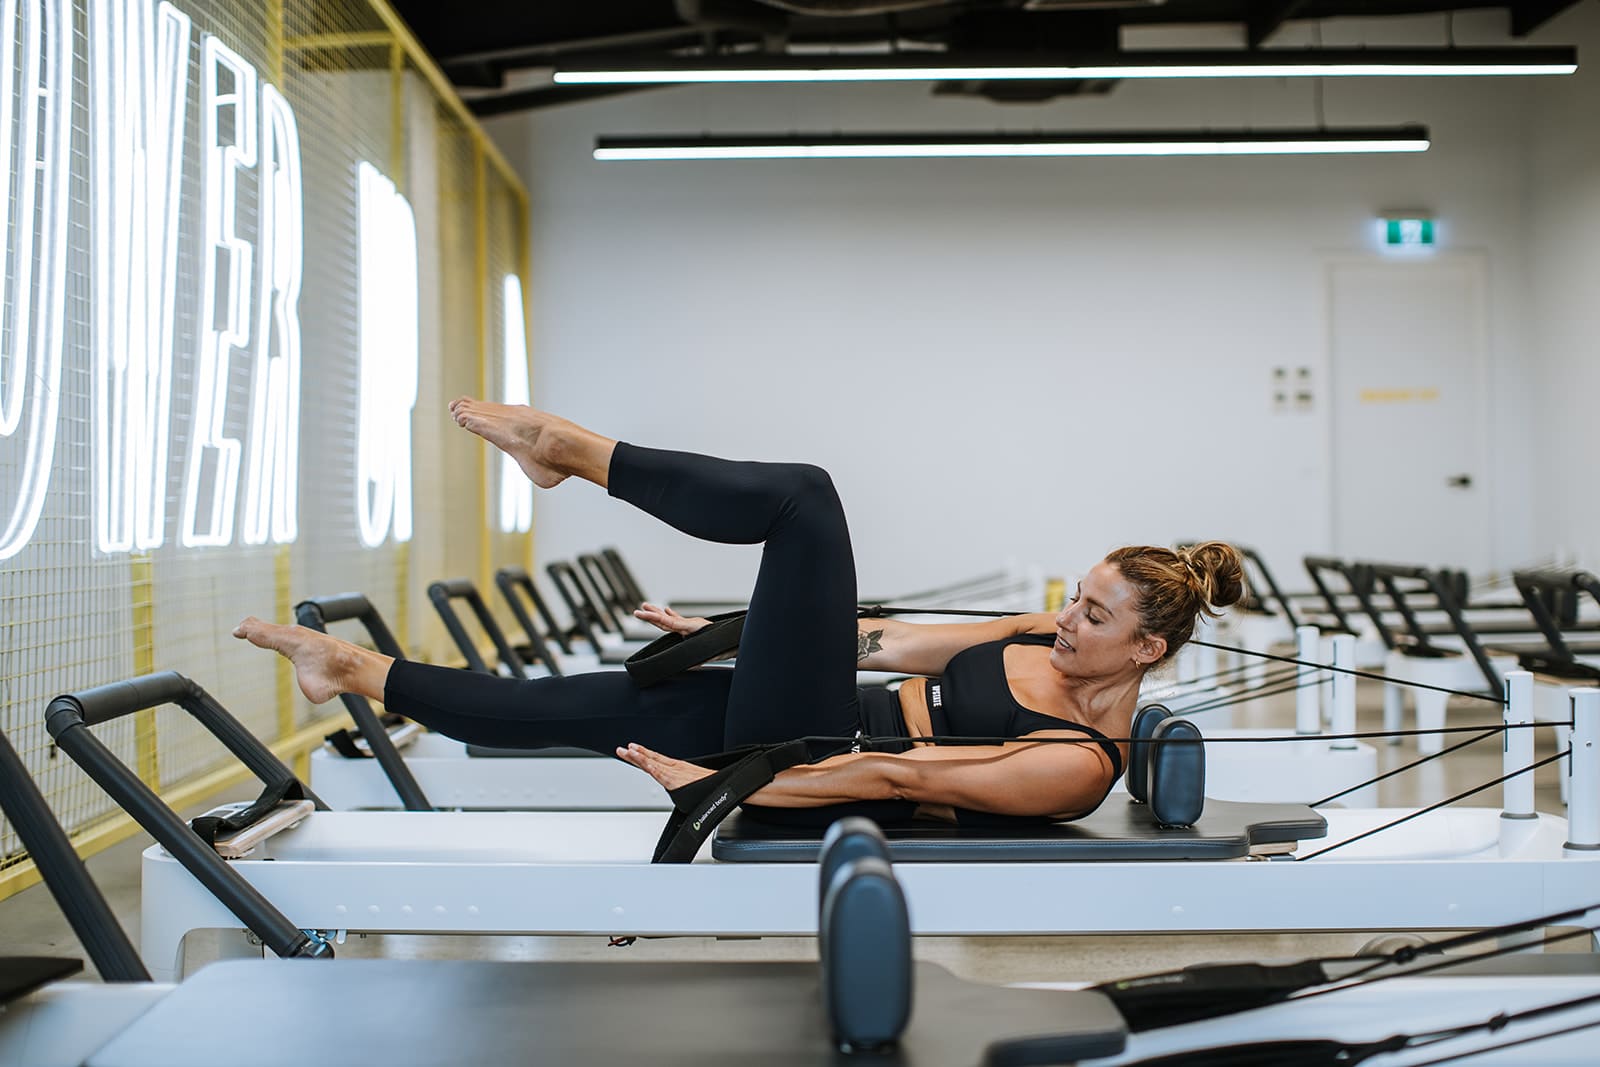 Madi Browne works out on reformer bed at Upstate Studios in chic industrial space in Fitzroy.